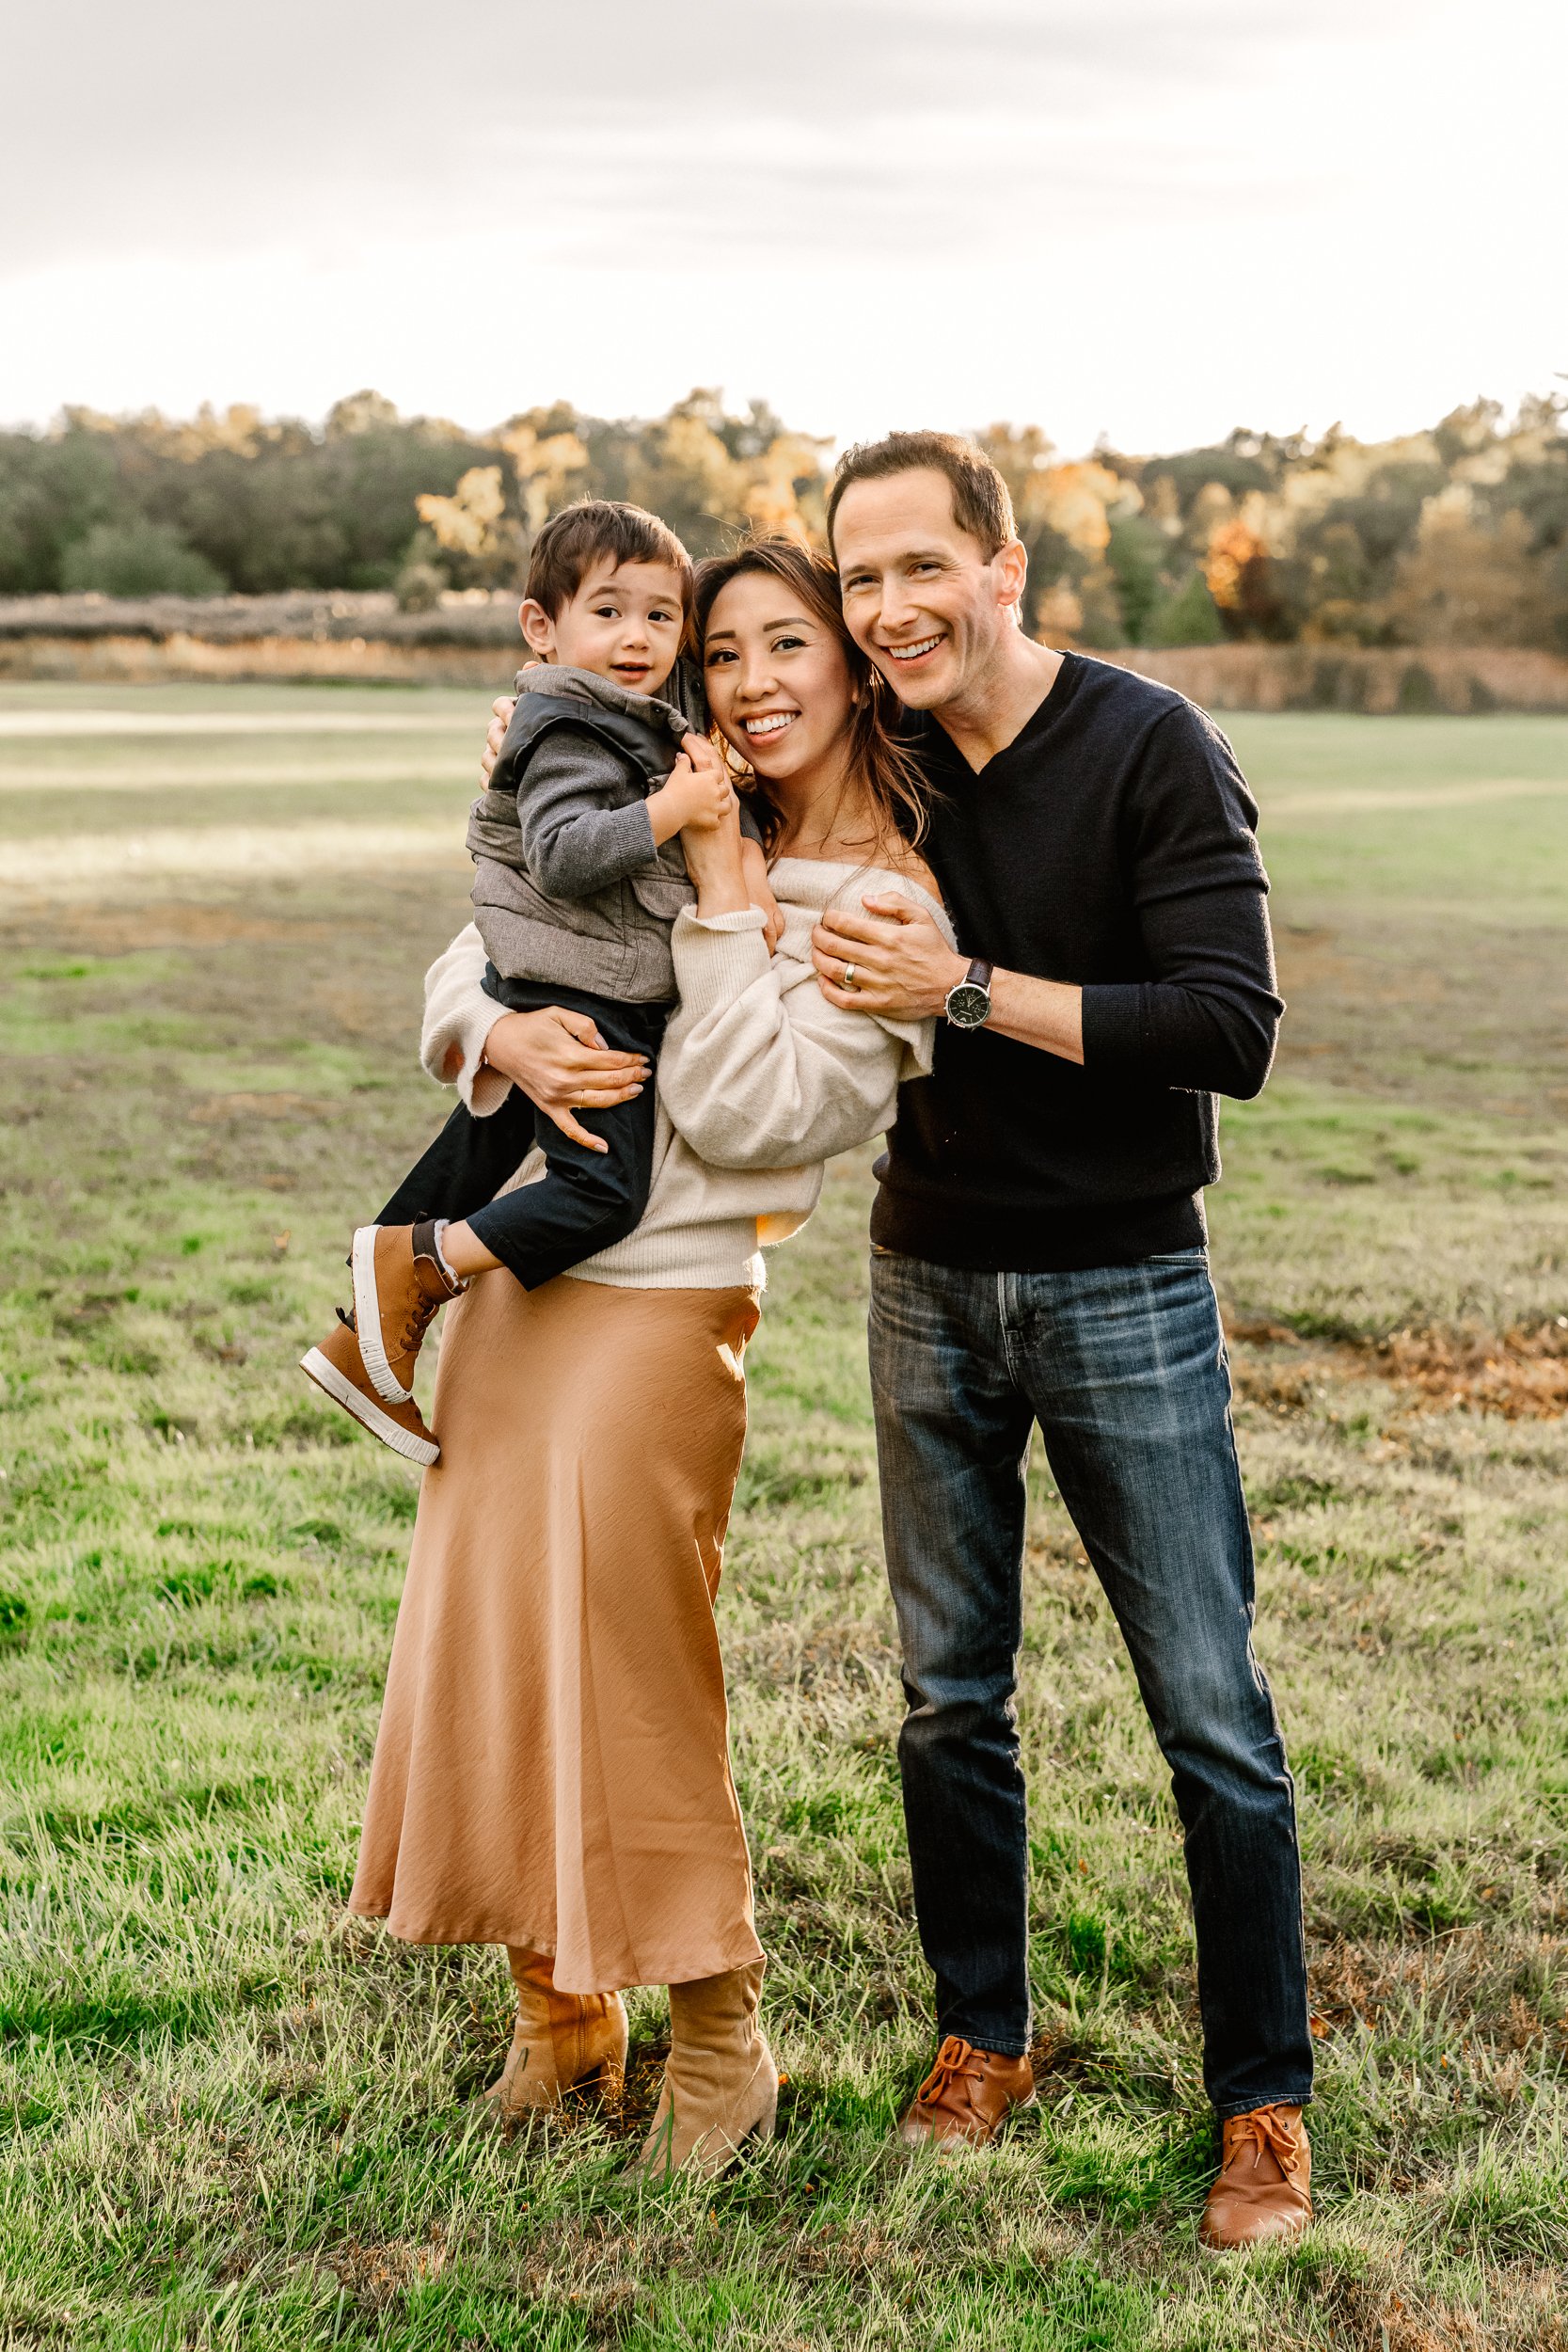  In a large green grass field with fall leaves in the background a family of three smiles while the sunsets in Verona Park by Nicole Hawkins Photography. sunset family photos NJ sunset family photographers Verona park family photos #nicolehawkinsphot